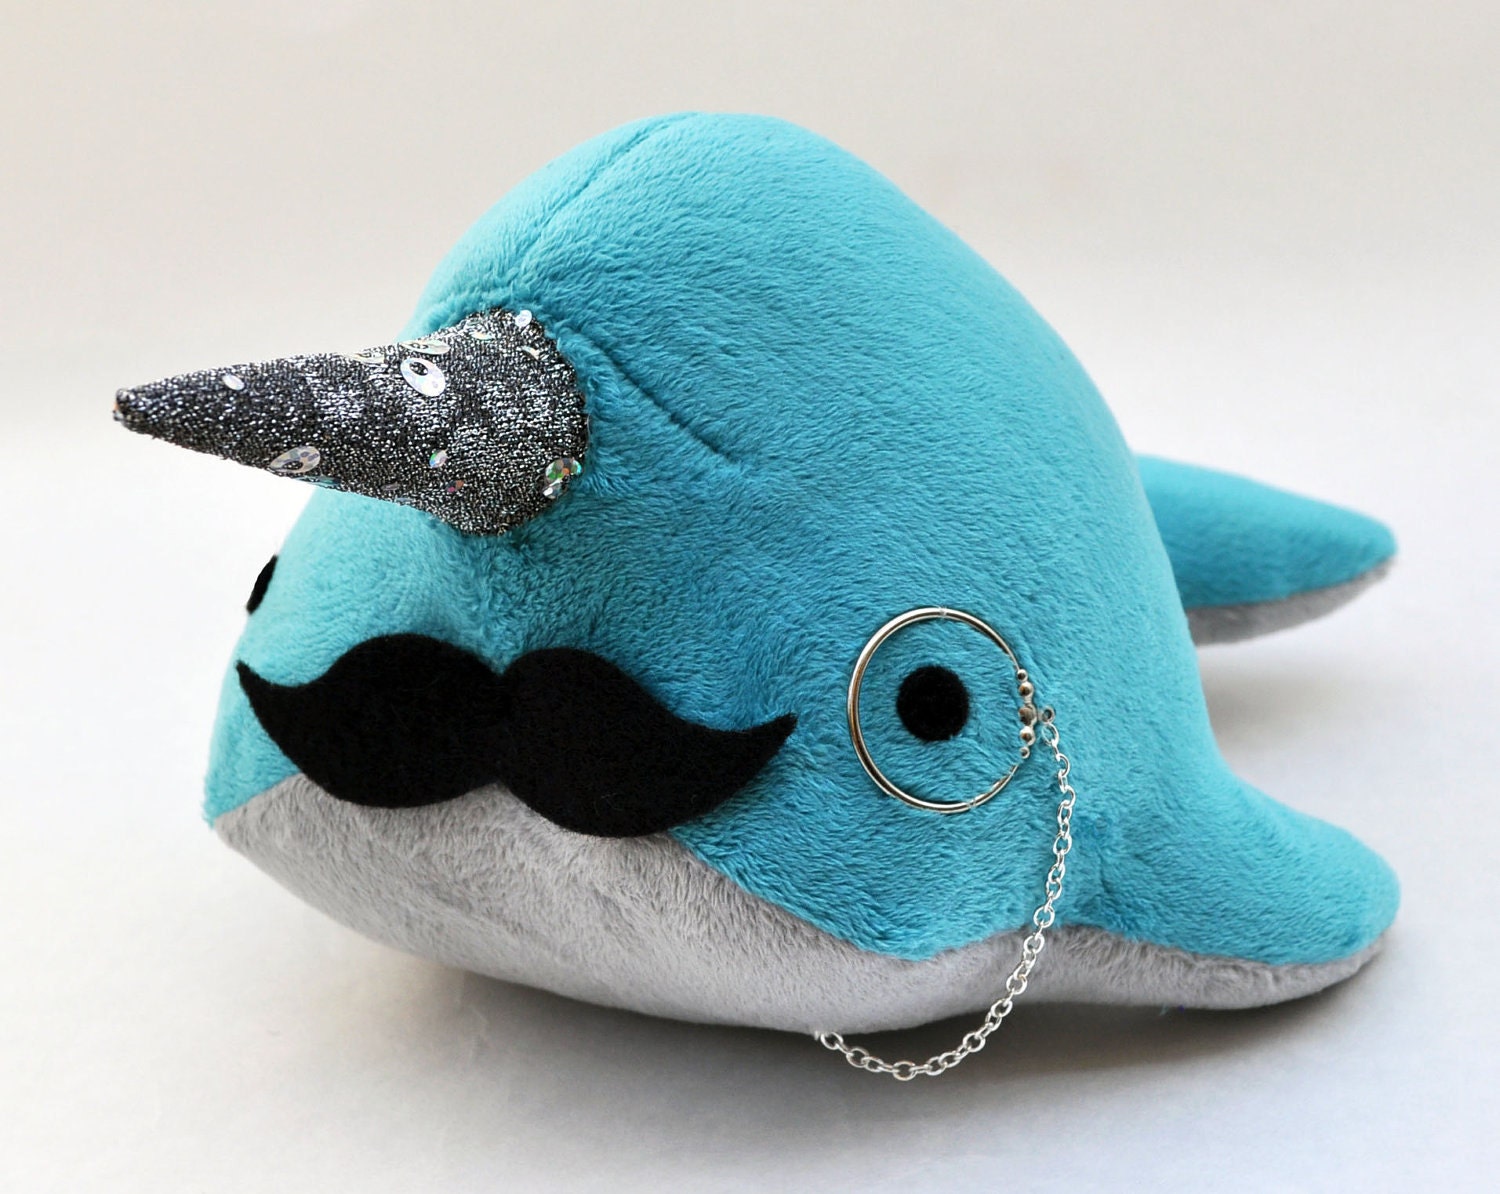 Narwhal Plush - with Mustache and Monocle - Medium - MADE TO ORDER (Choose colors)